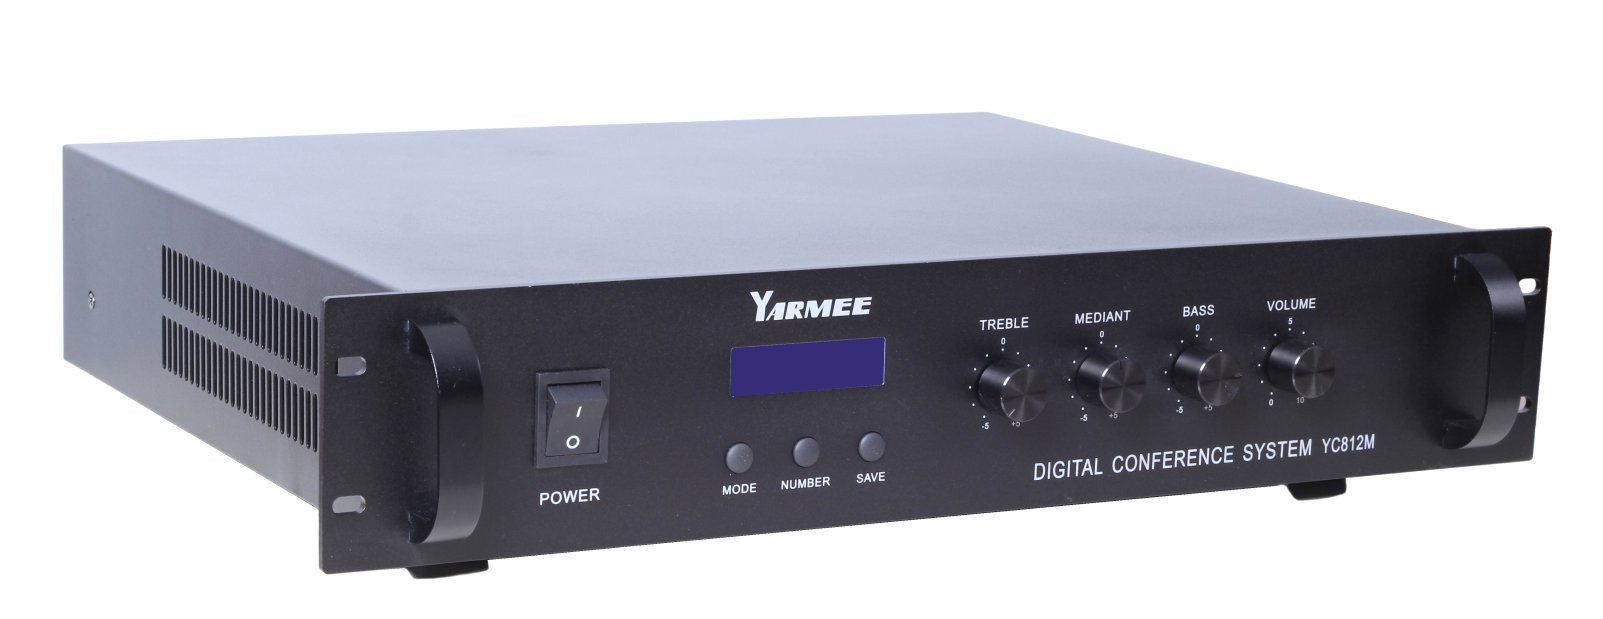 Basic discussion conference system YC812